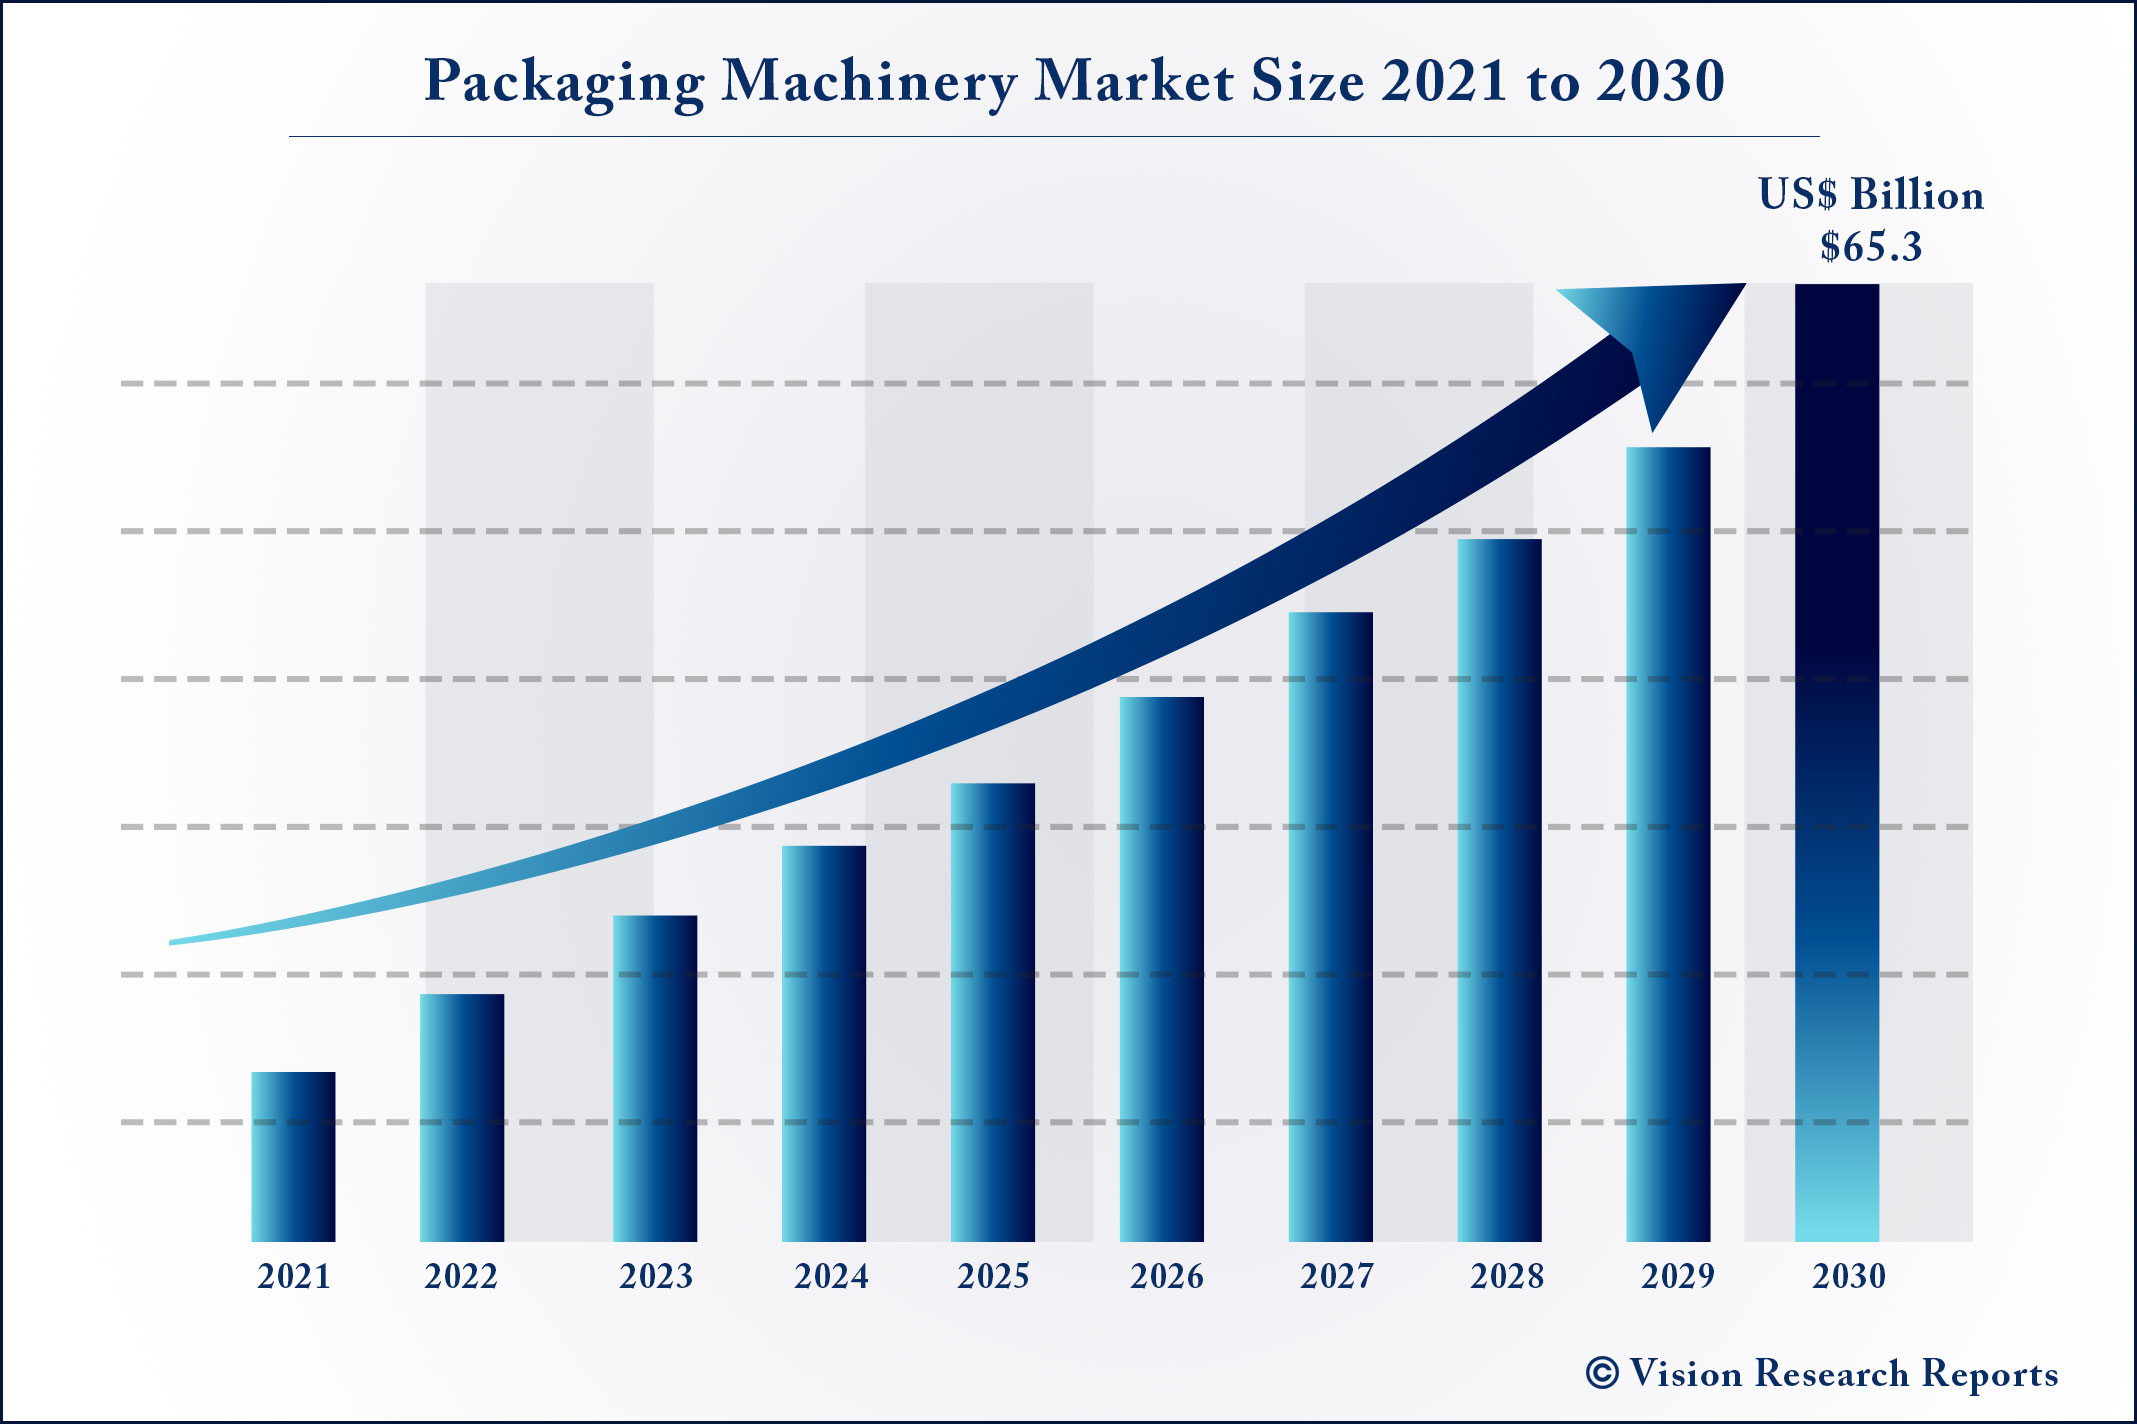 Packaging Machinery Market Size 2021 to 2030